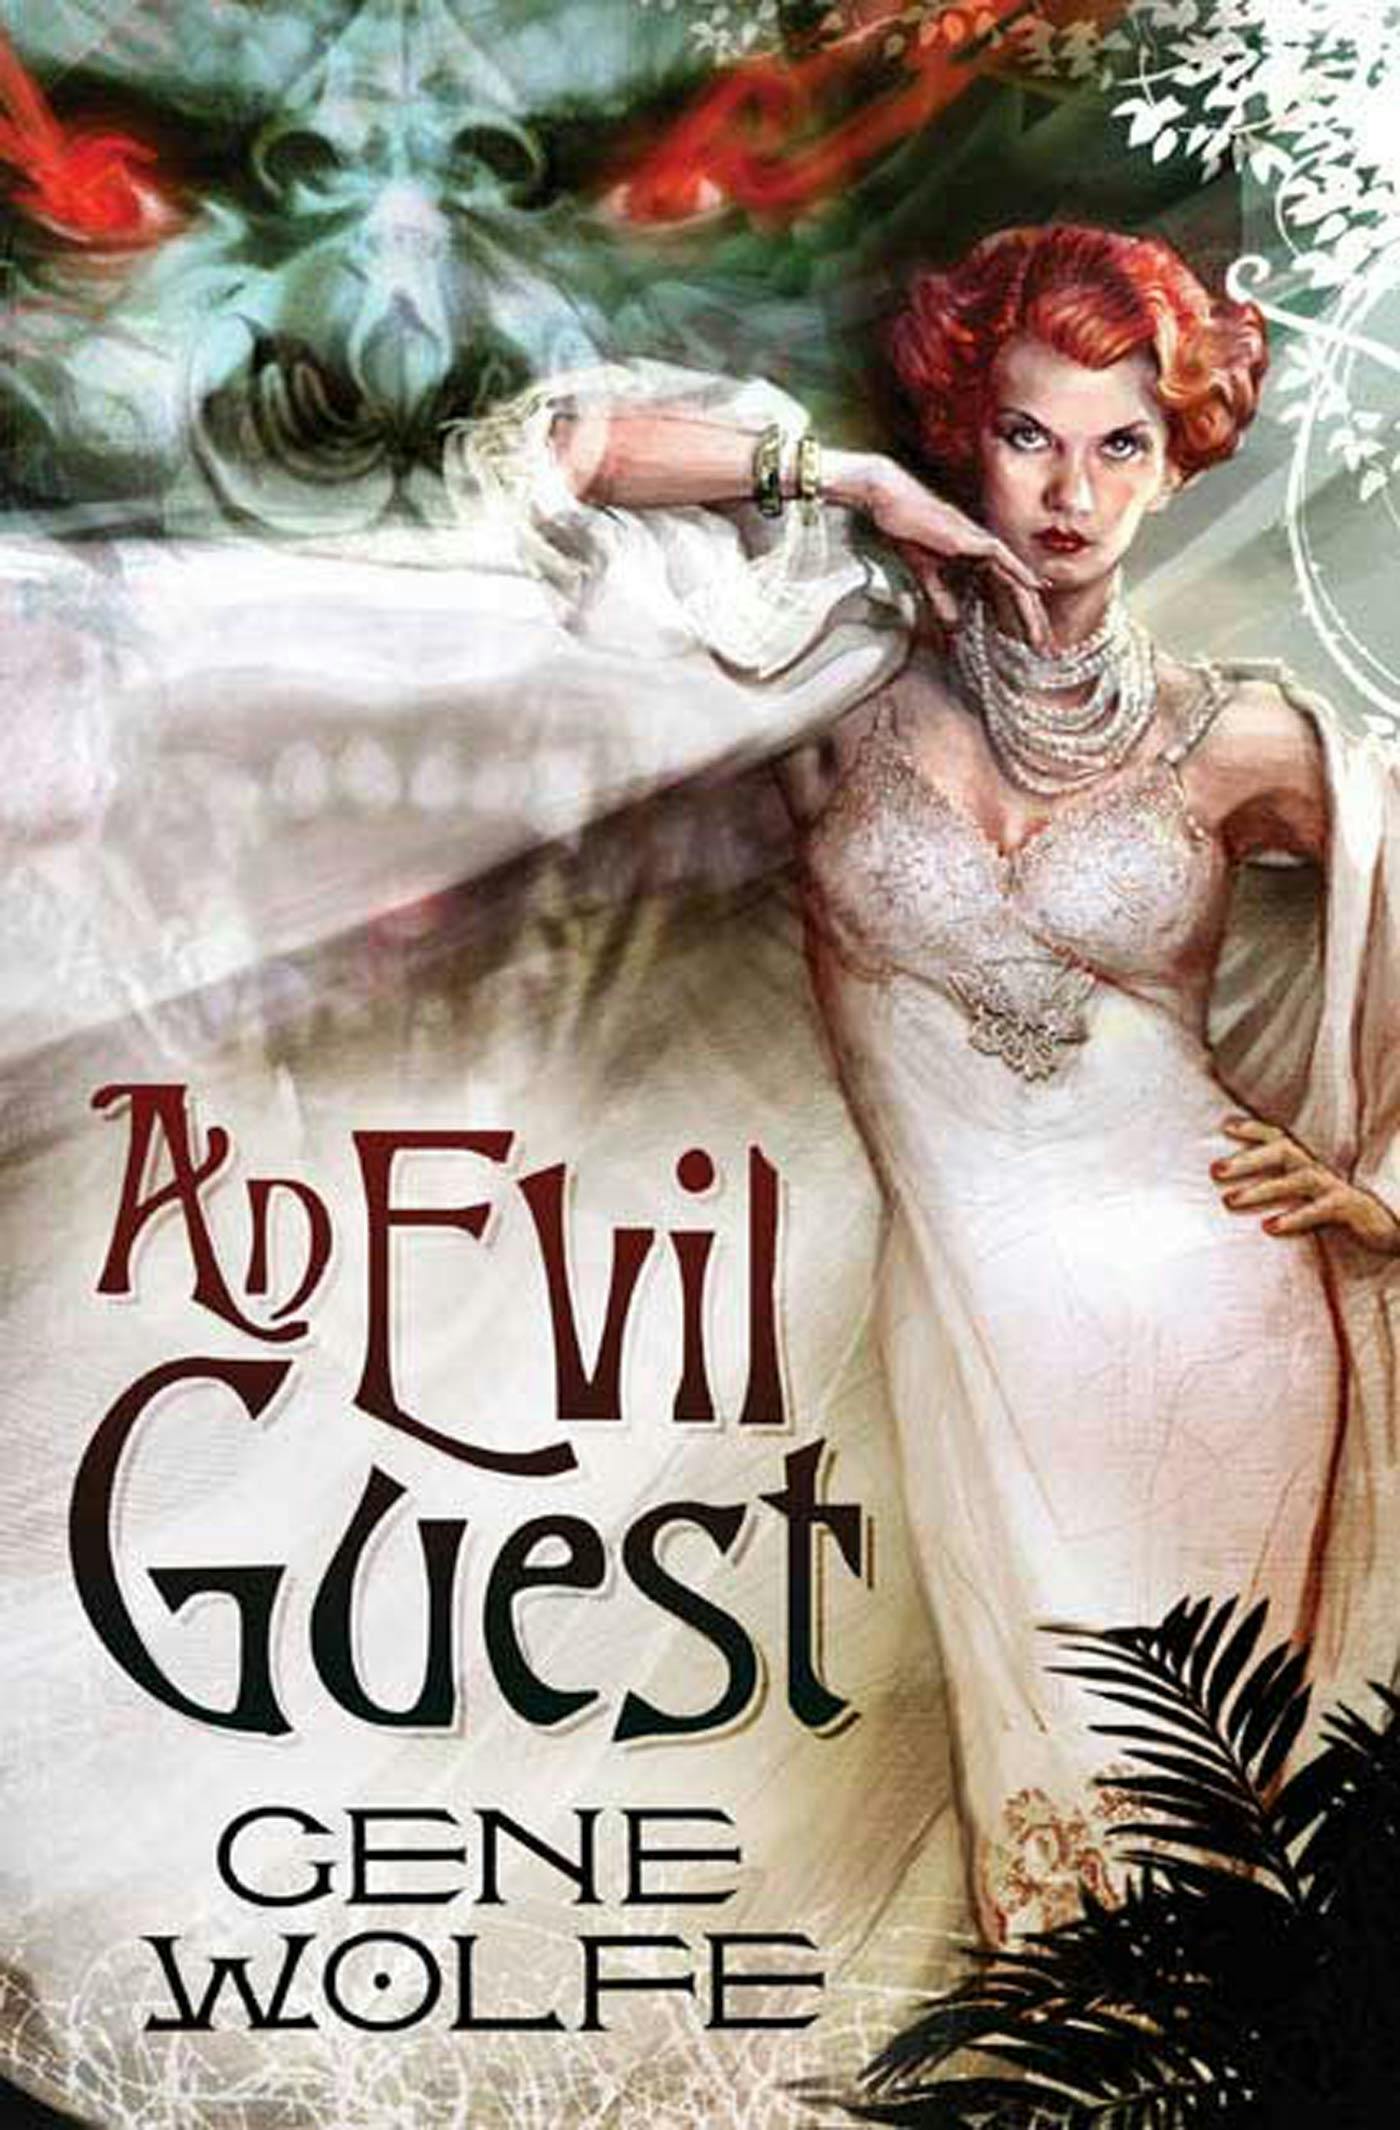 Cover for the book titled as: An Evil Guest